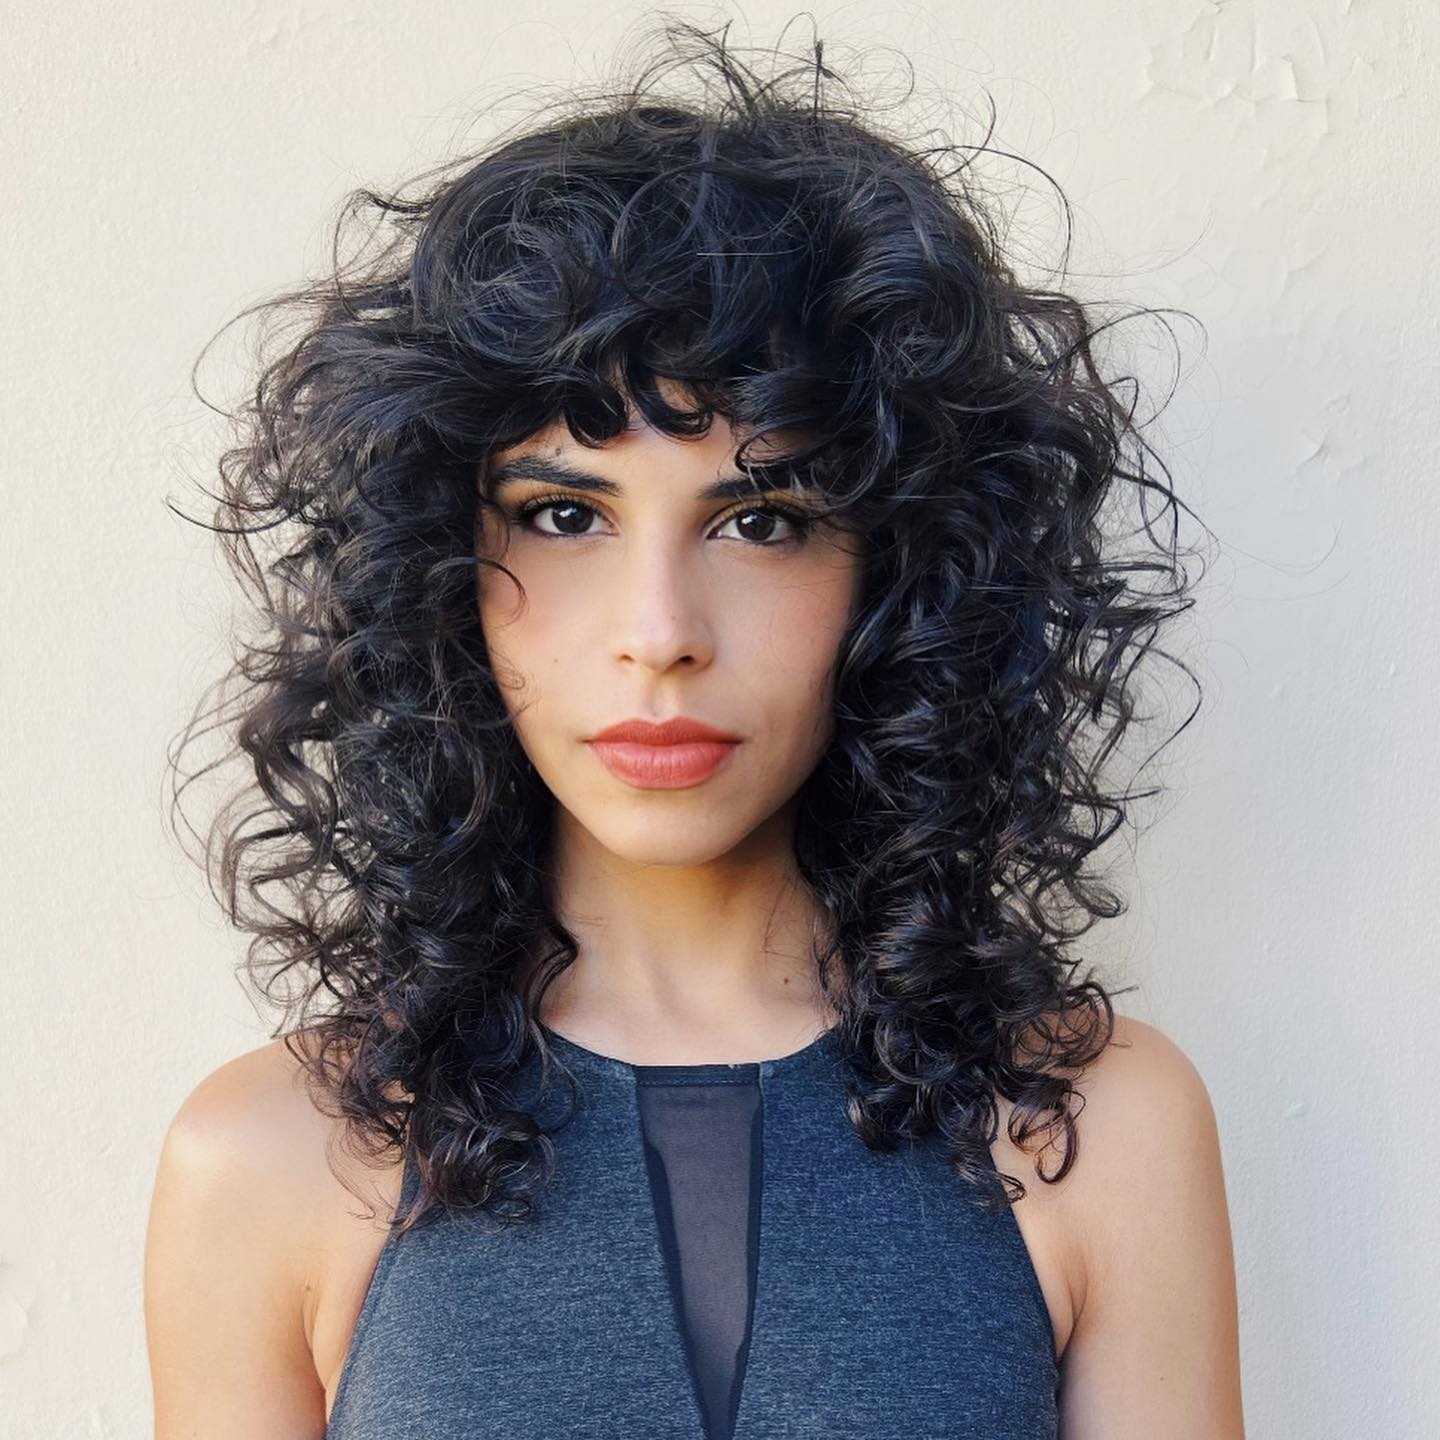 Curly Shag Hairstyle 34 Curly hair shaggy bob | Curly shag mullet | Medium length curly shags Curly Shag Hairstyles for Women